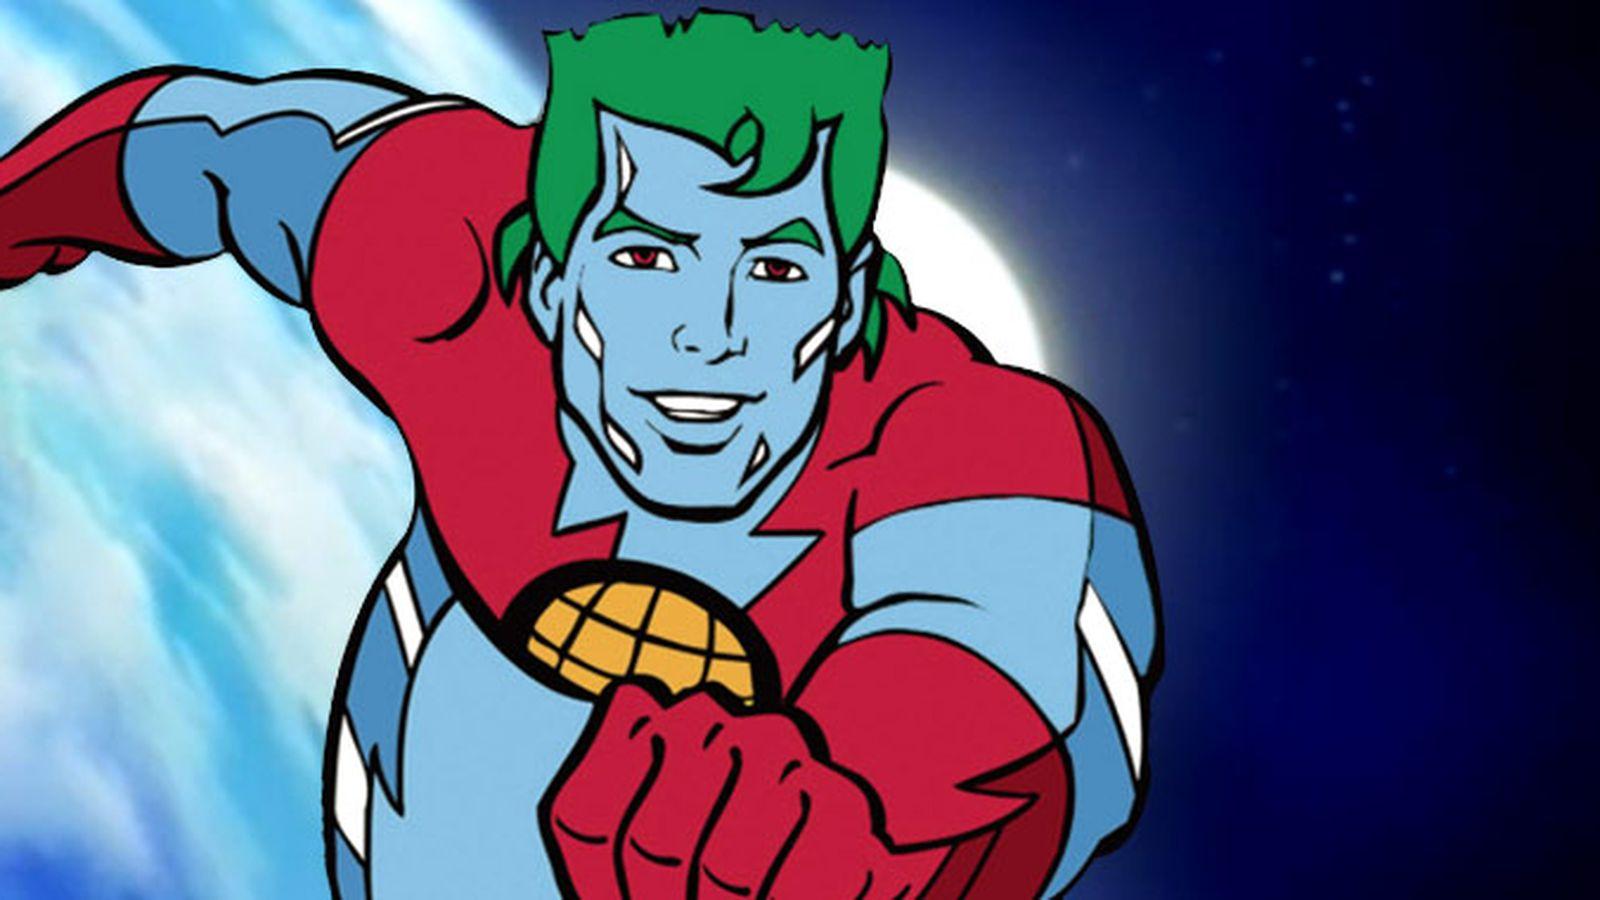 Storylines From 'Captain Planet' That Predicted What the World